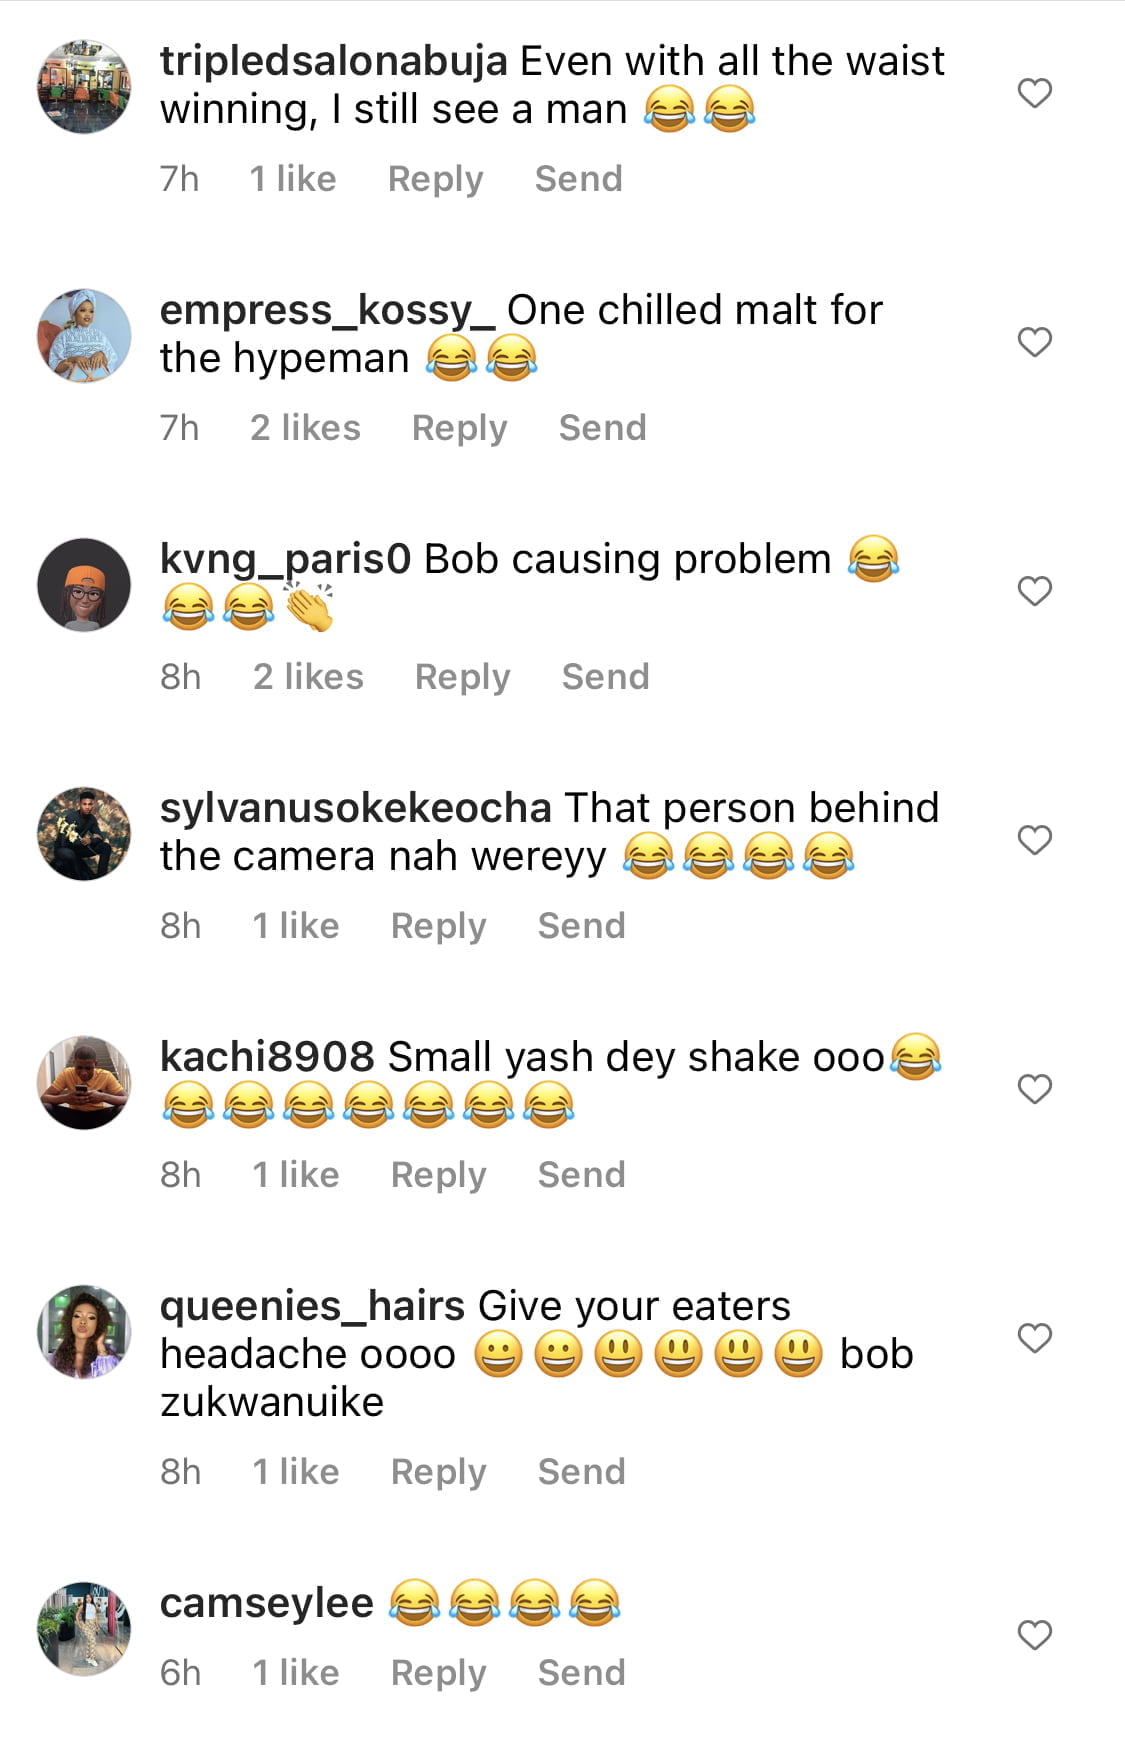 Stop forcing it ‘bro’ - Netizens advice bobrisky after he sampled his stagnant backside [video]